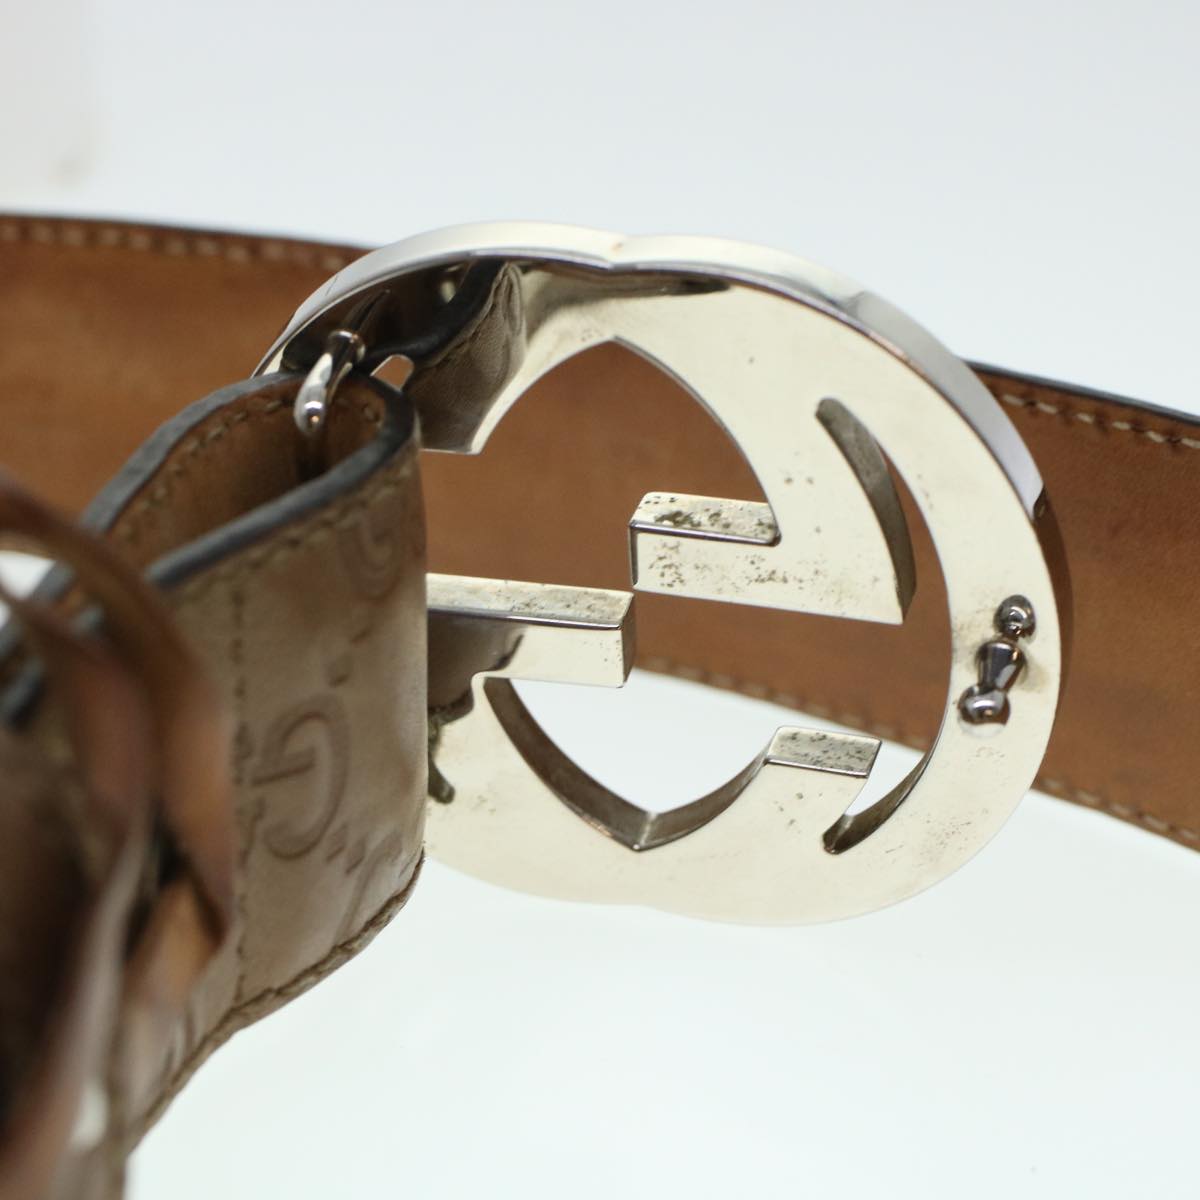 GUCCI GG Canvas Belt Leather 36.2""-43.3"" Brown 114984 Auth hk727